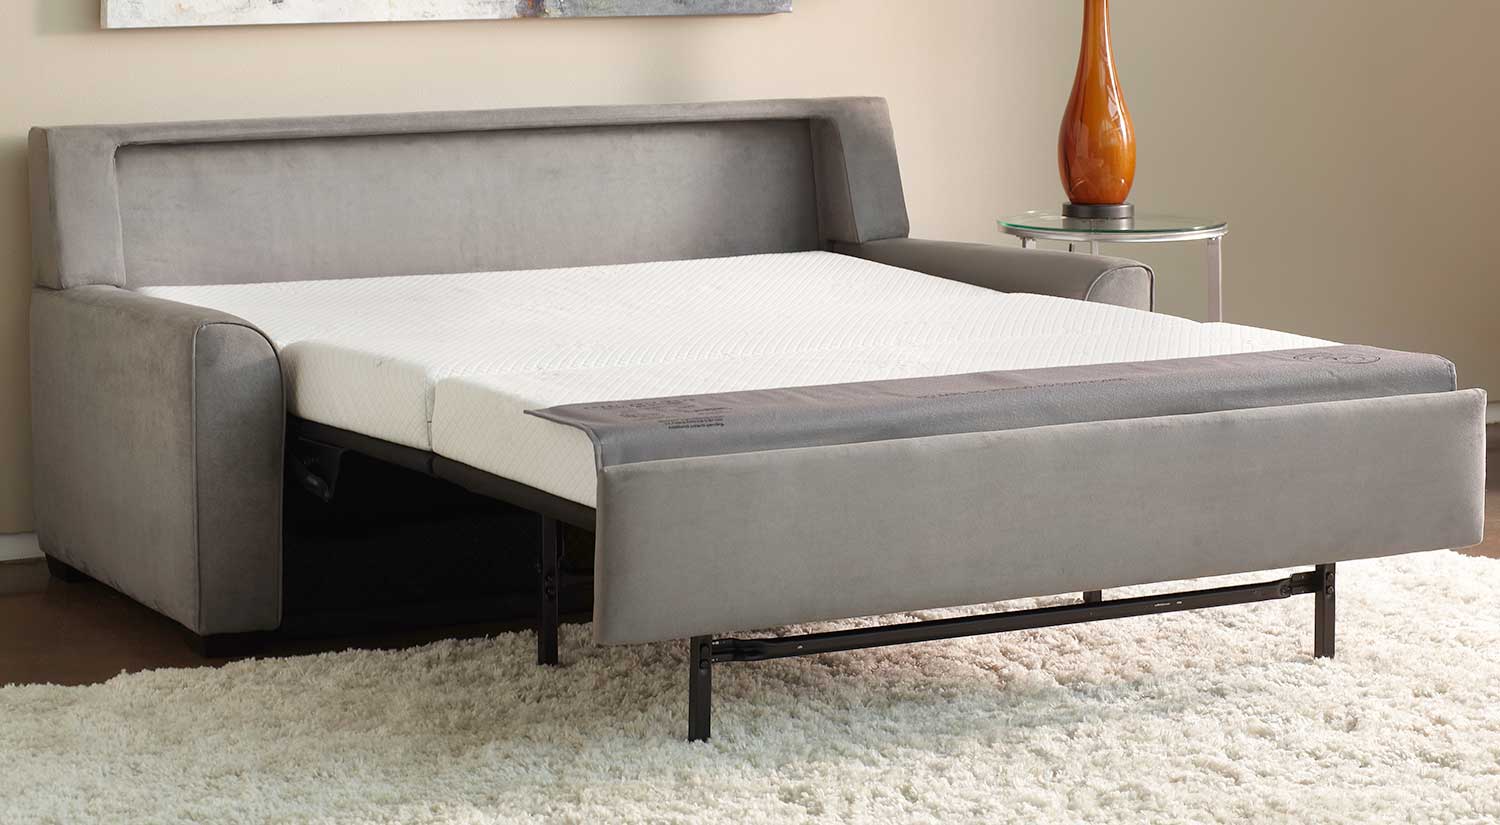 comfort sleeper sofa with the bed pulled out